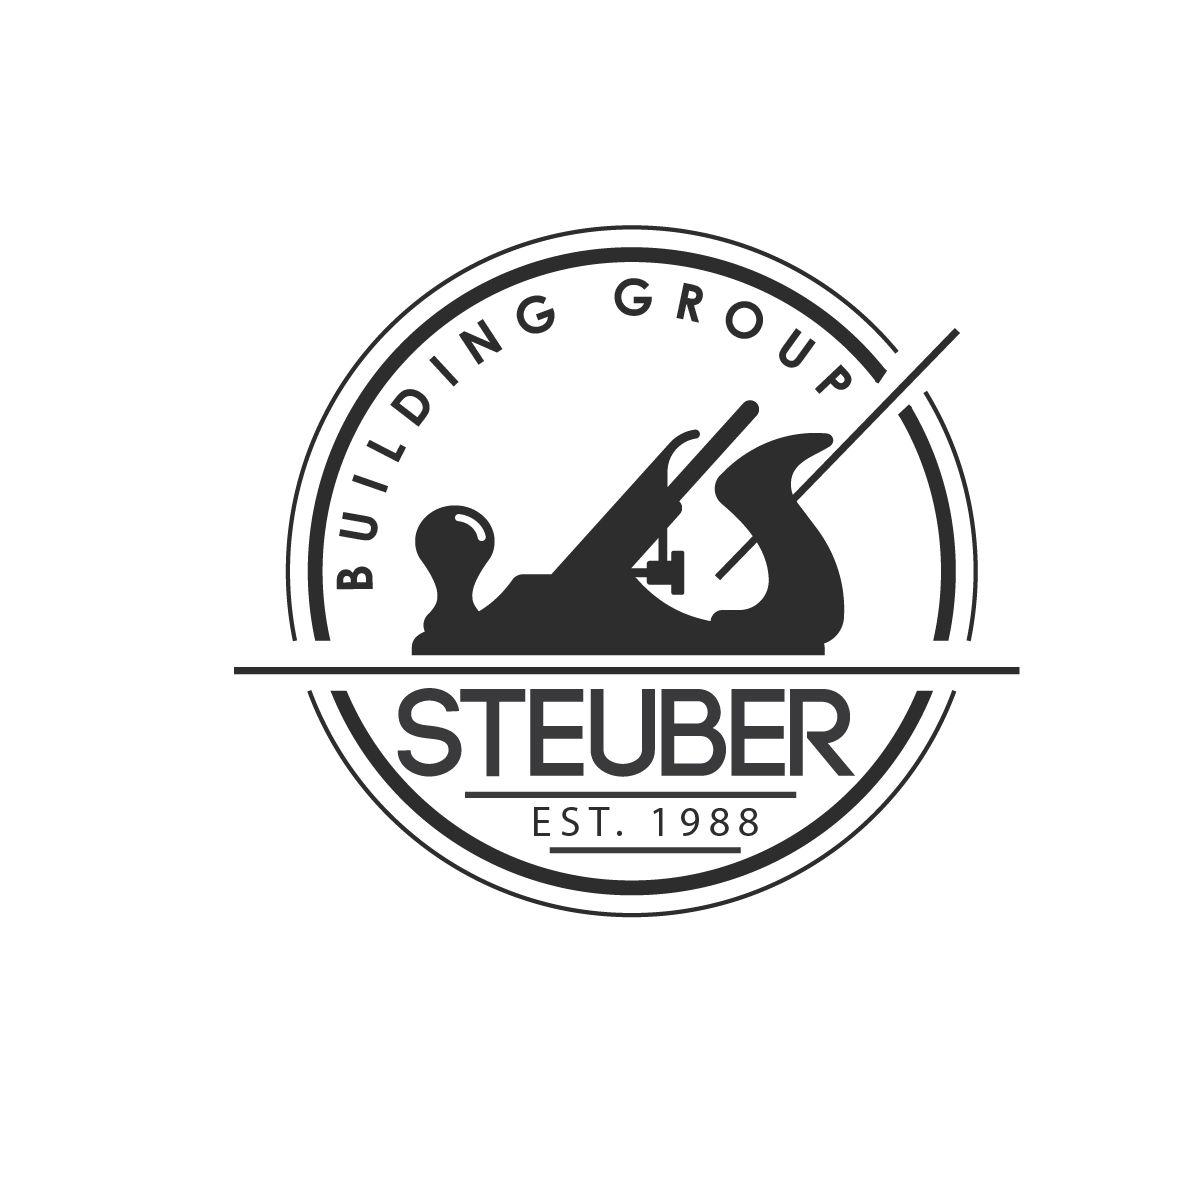 Steuber Building Group